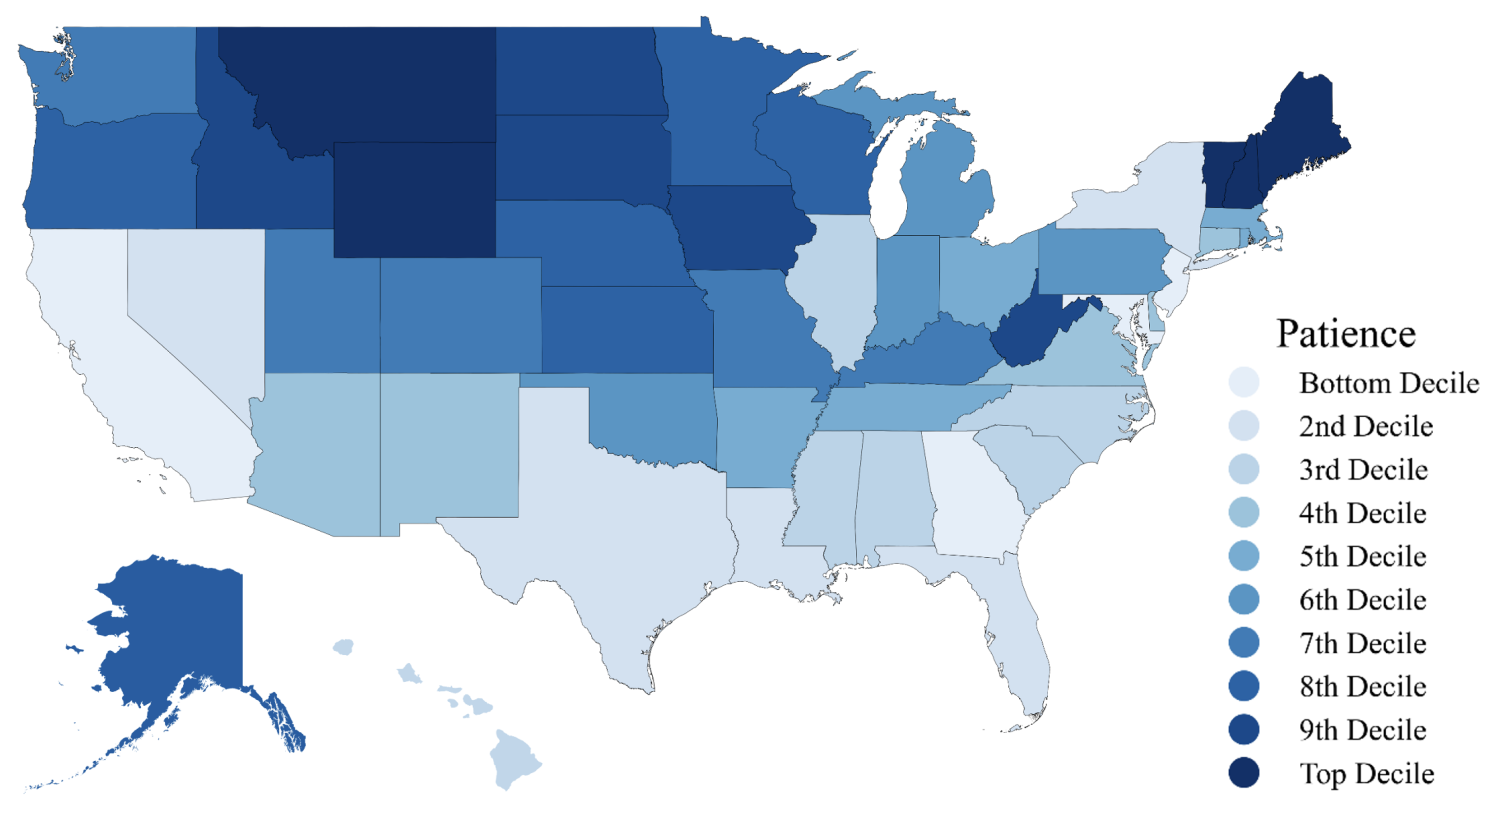 Figure 2 Facebook-derived measure of patience for US states